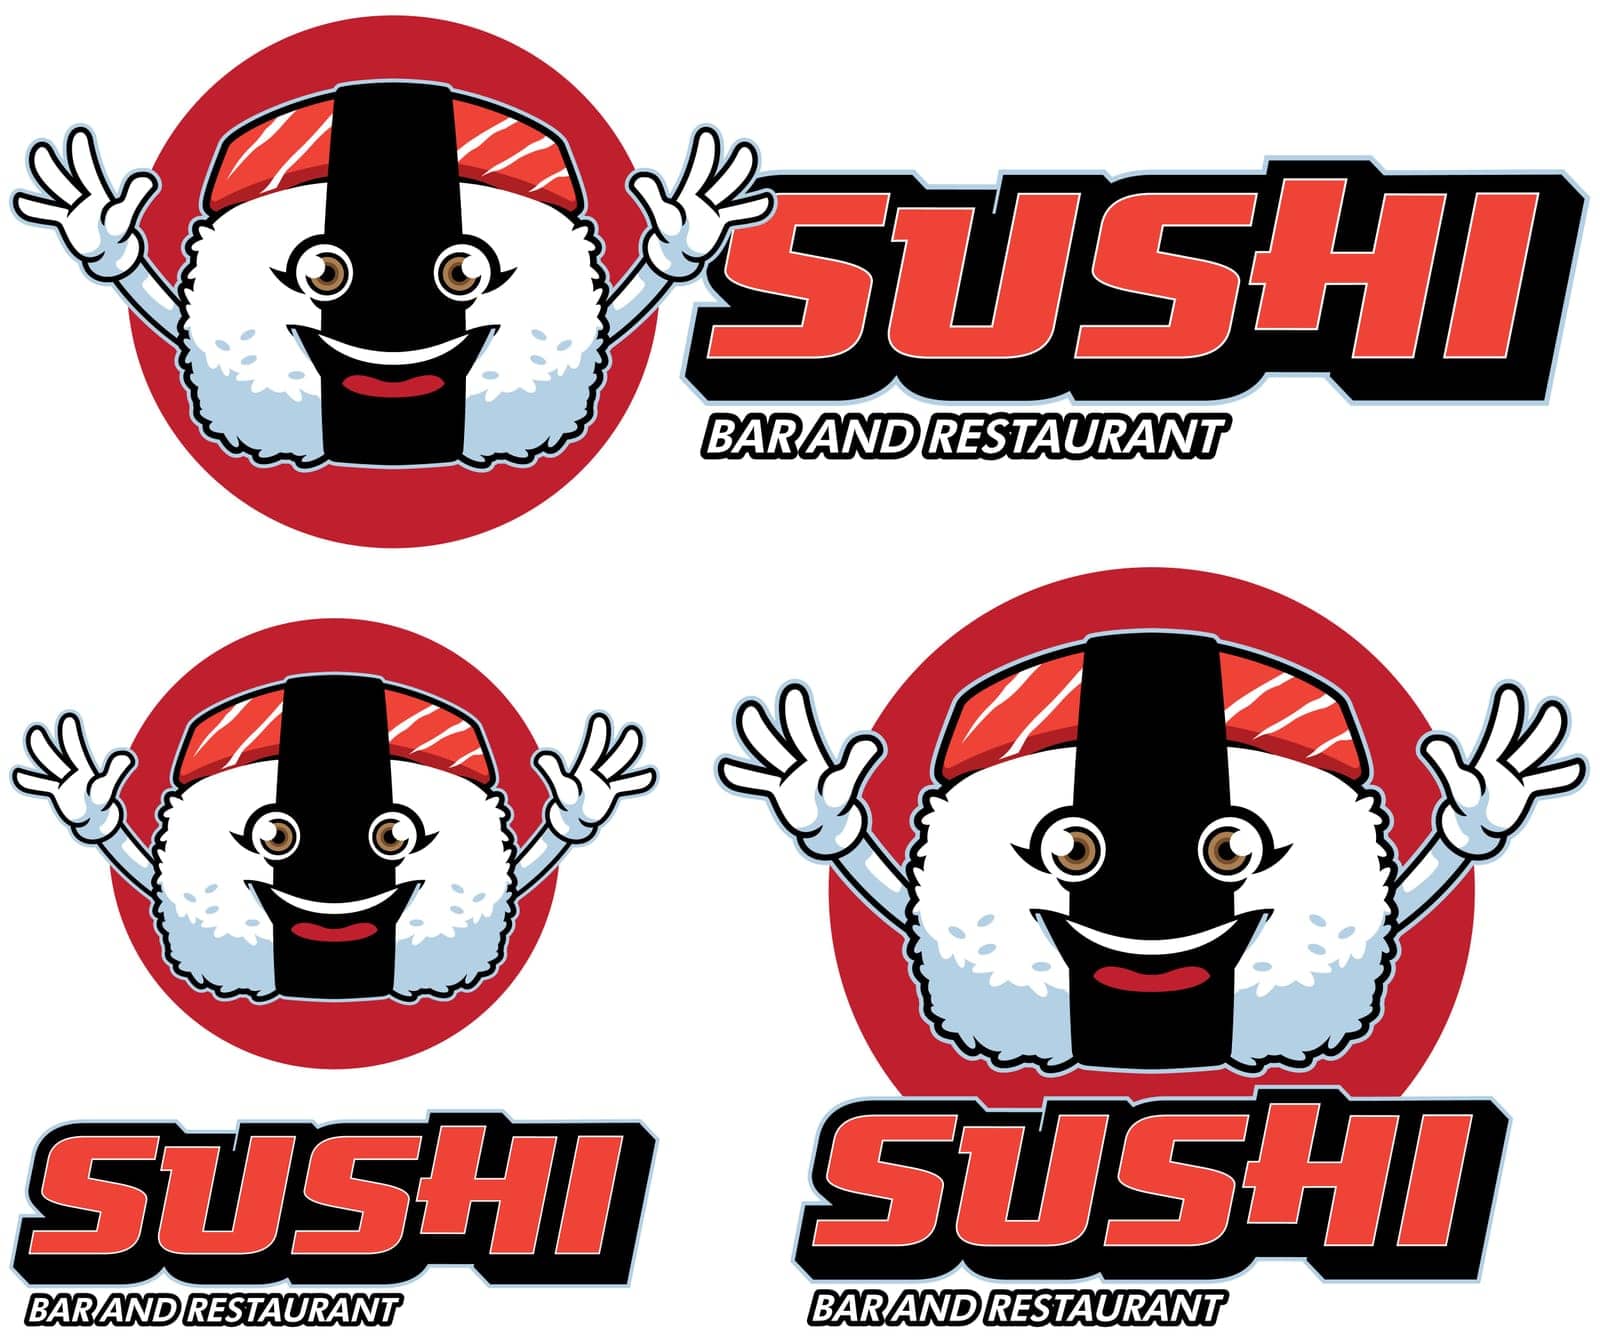 Cartoon mascot with funny and cheerful sushi character.